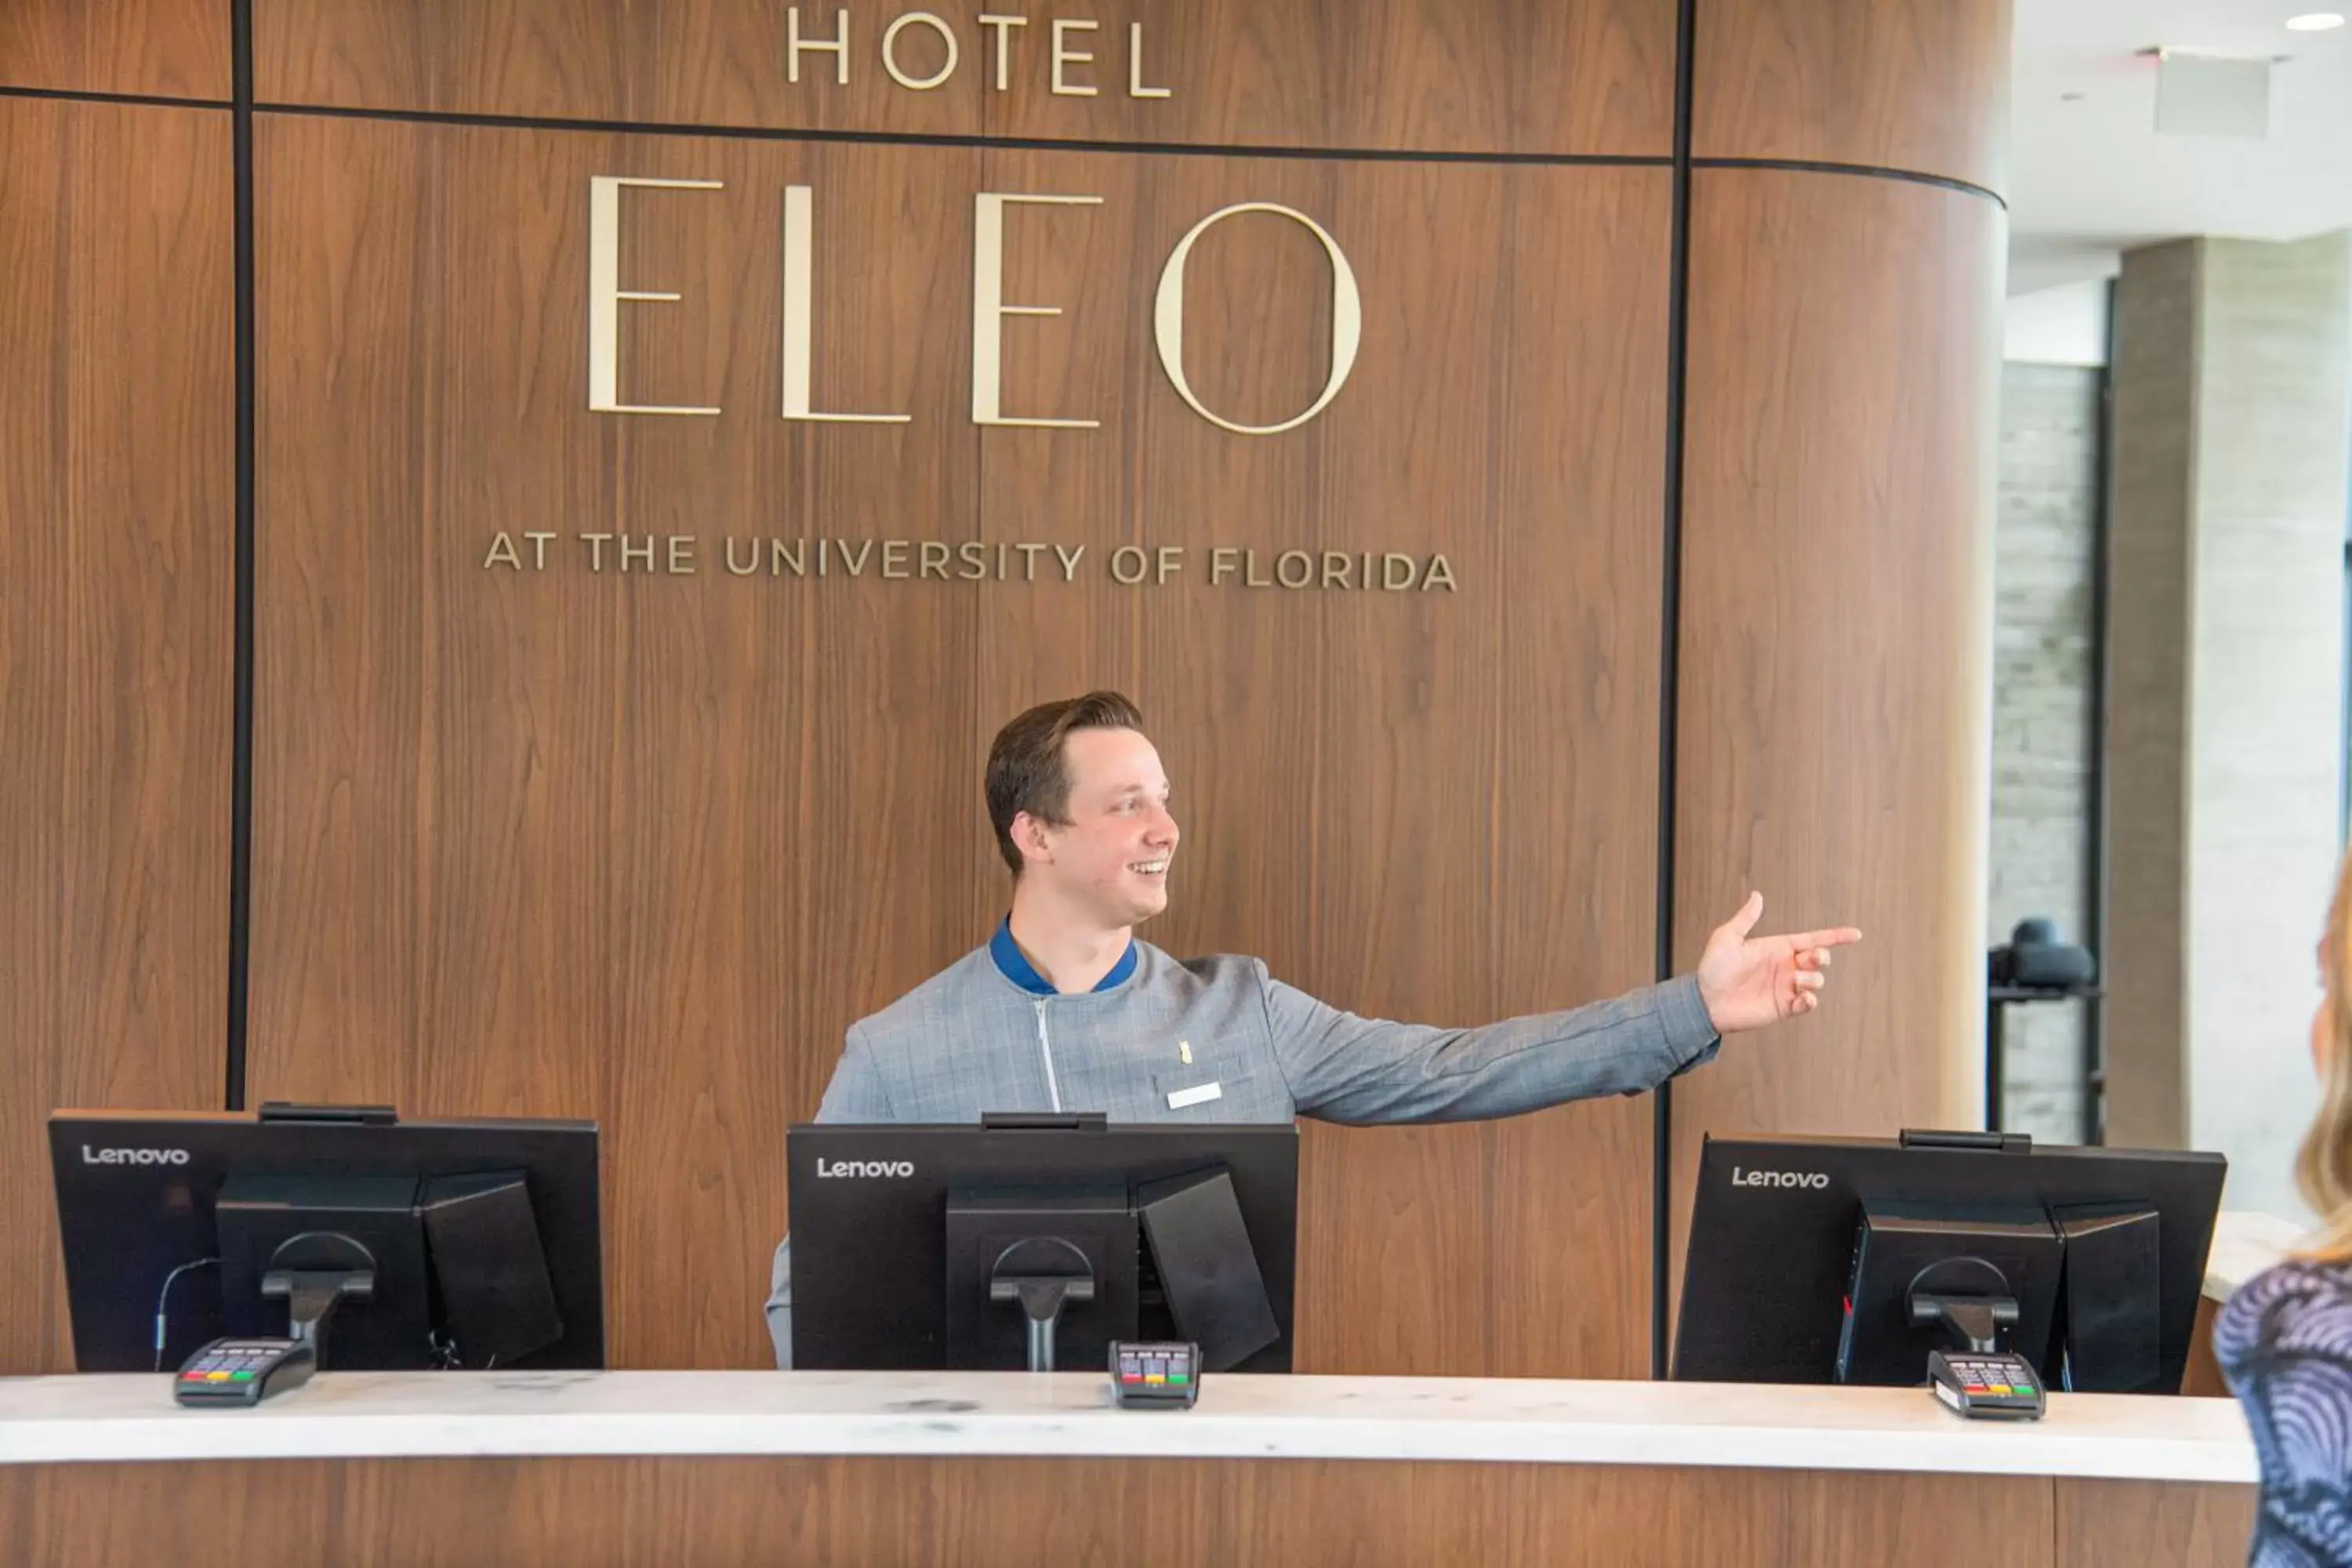 Staff, Lobby/Reception in Hotel Eleo at the University of Florida